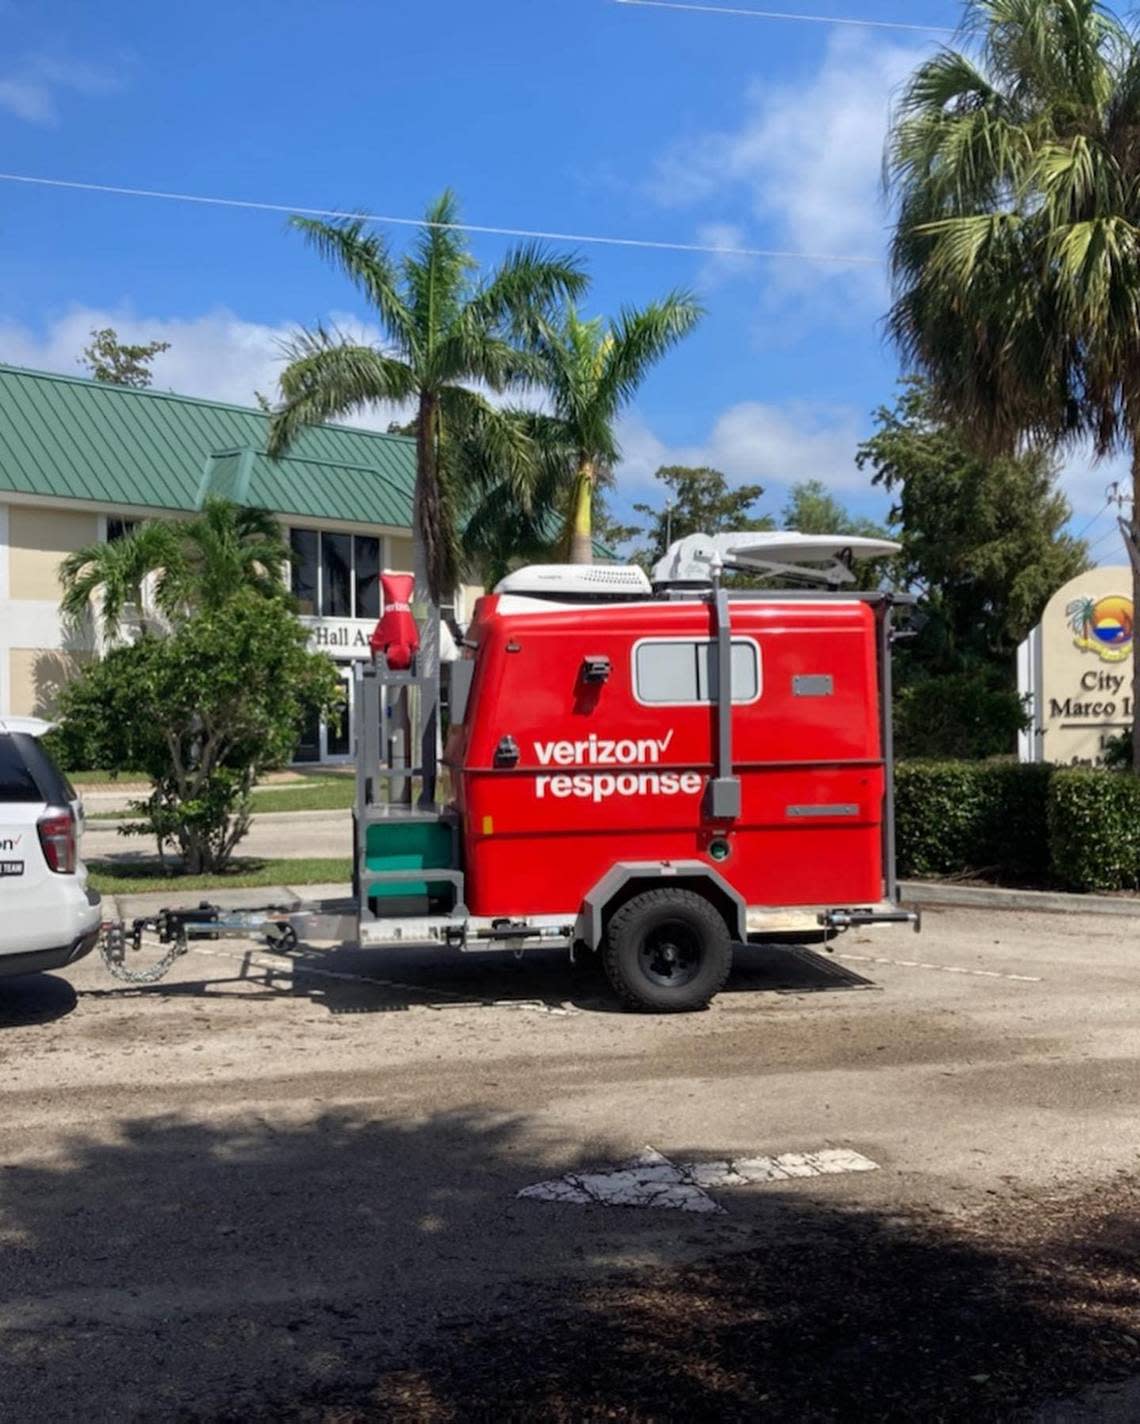 Verizon deployed temporary mobile network equipment a day after Hurricane Ian’s landfall to provide cellphone and internet service to the police and fire department of Marco Island in Collier County on Thursday, Sept. 29, 2022.